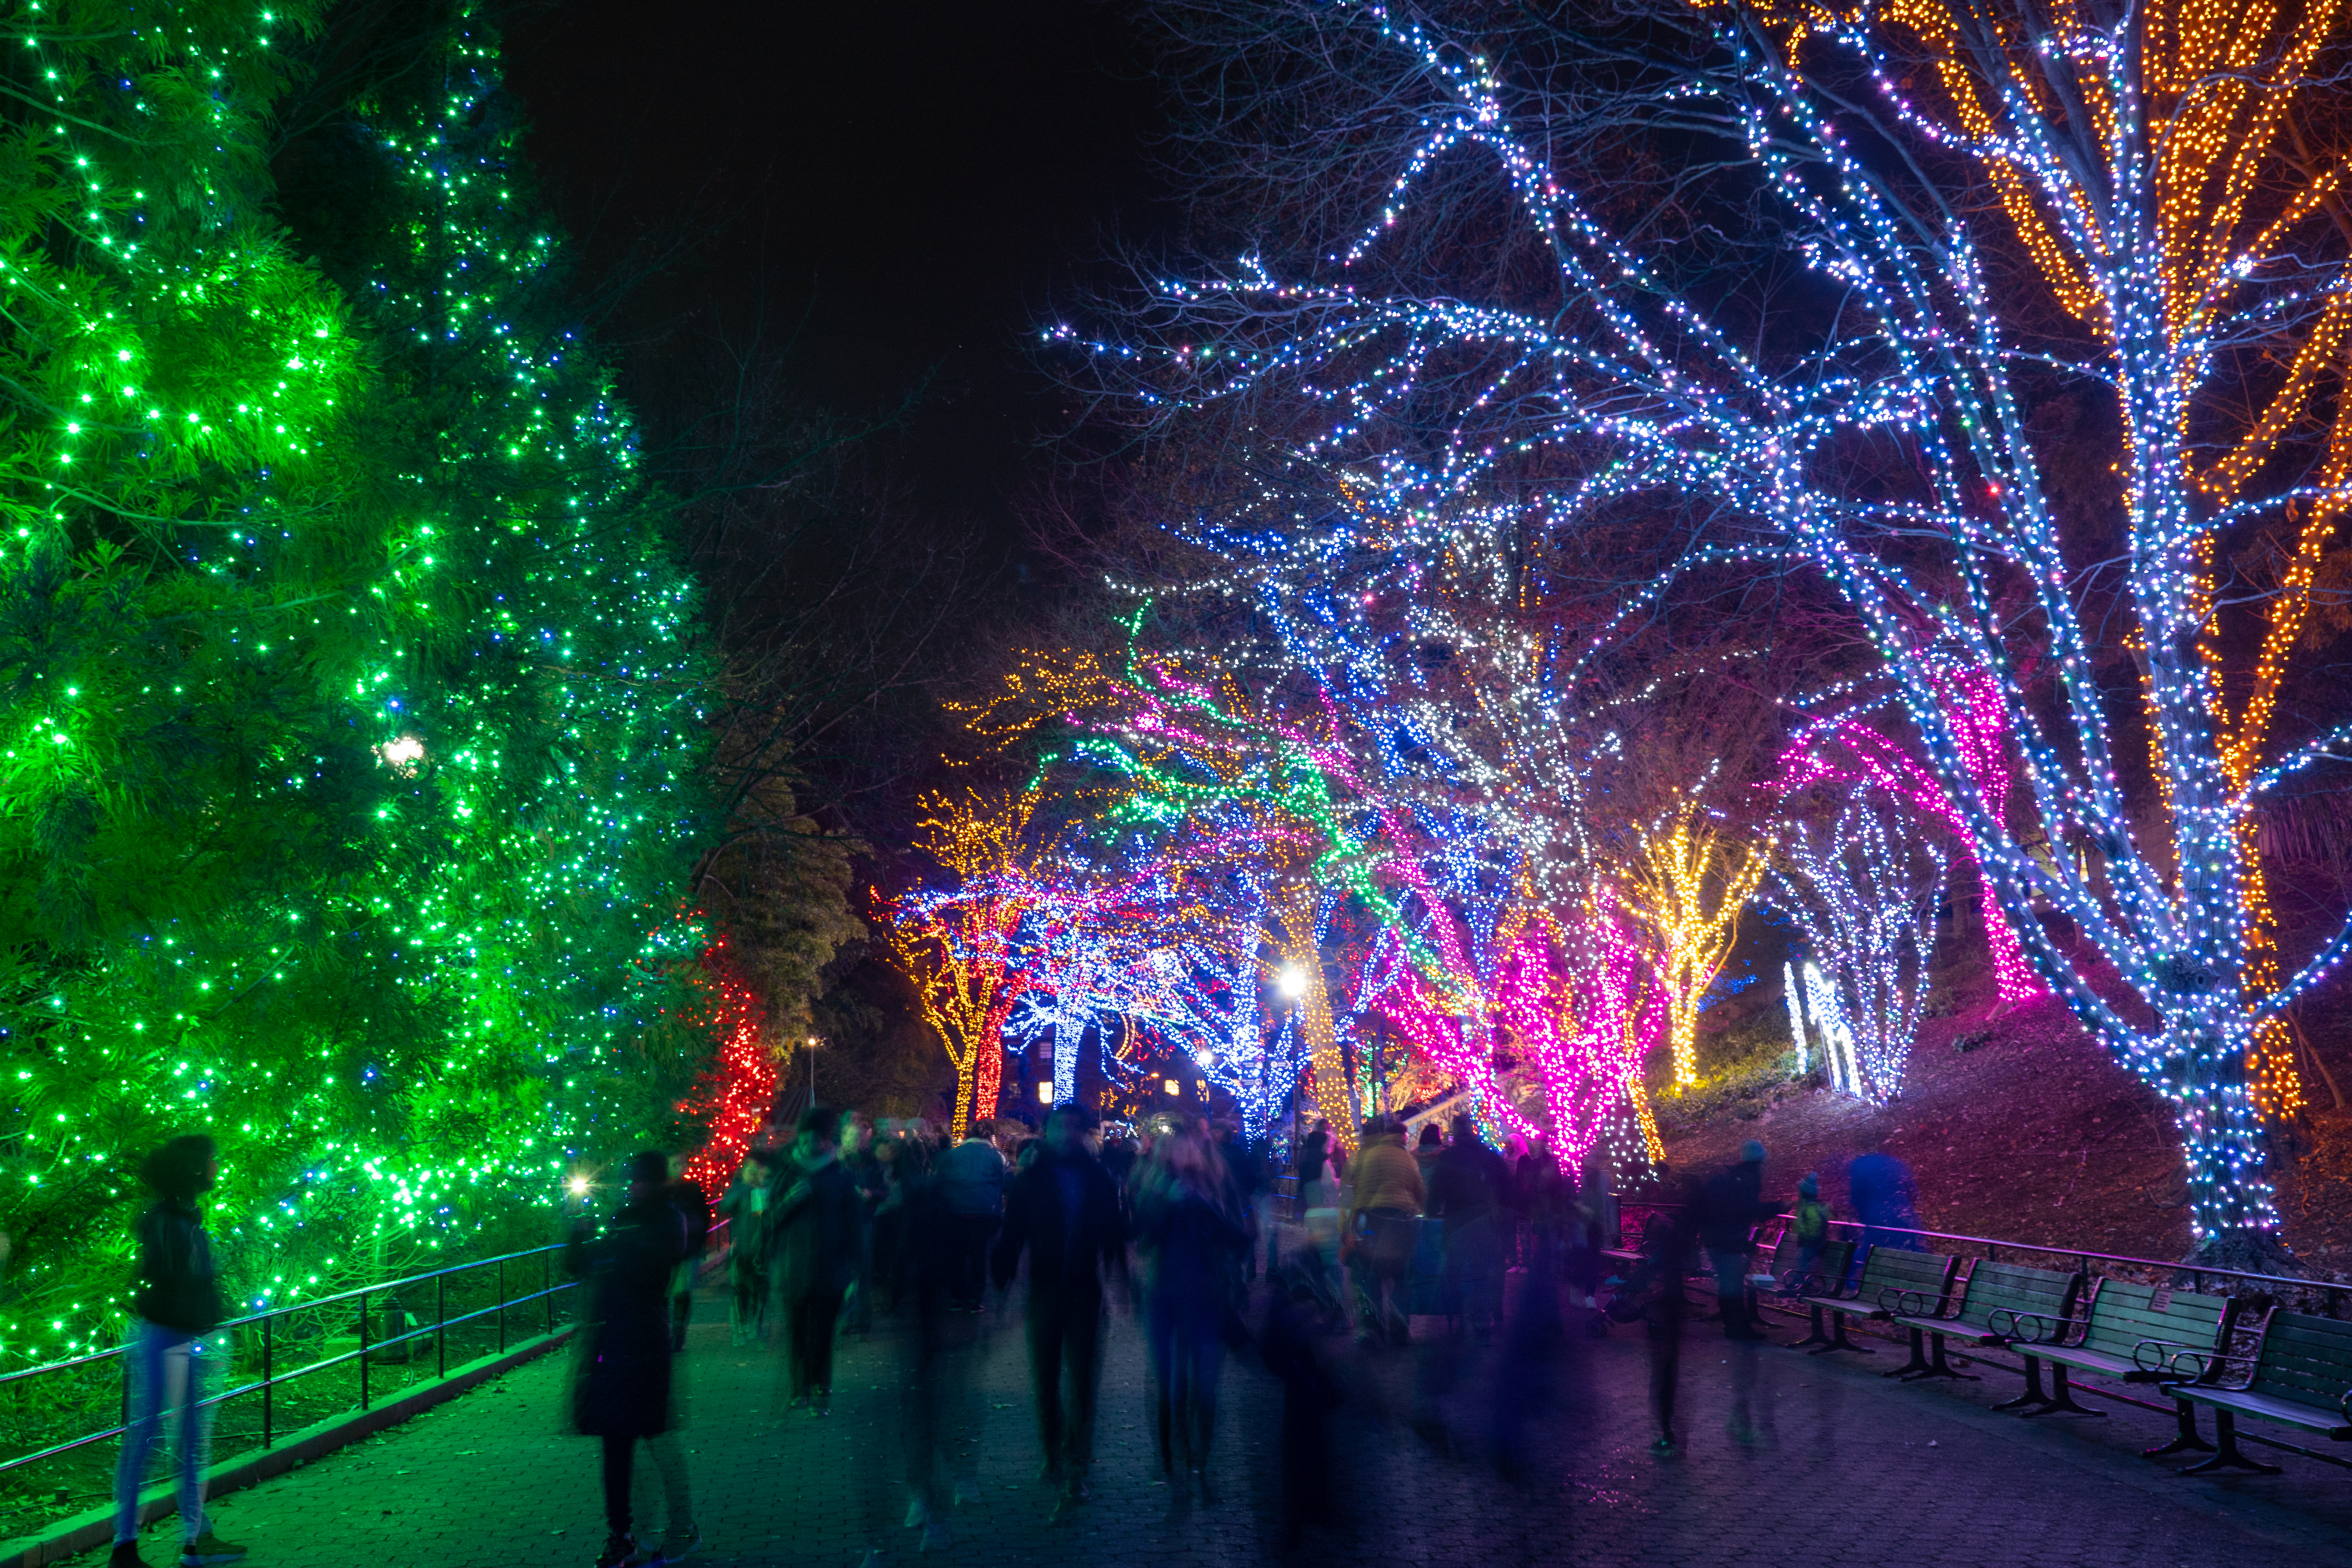 Trees festively decorated with brightly colored lights 